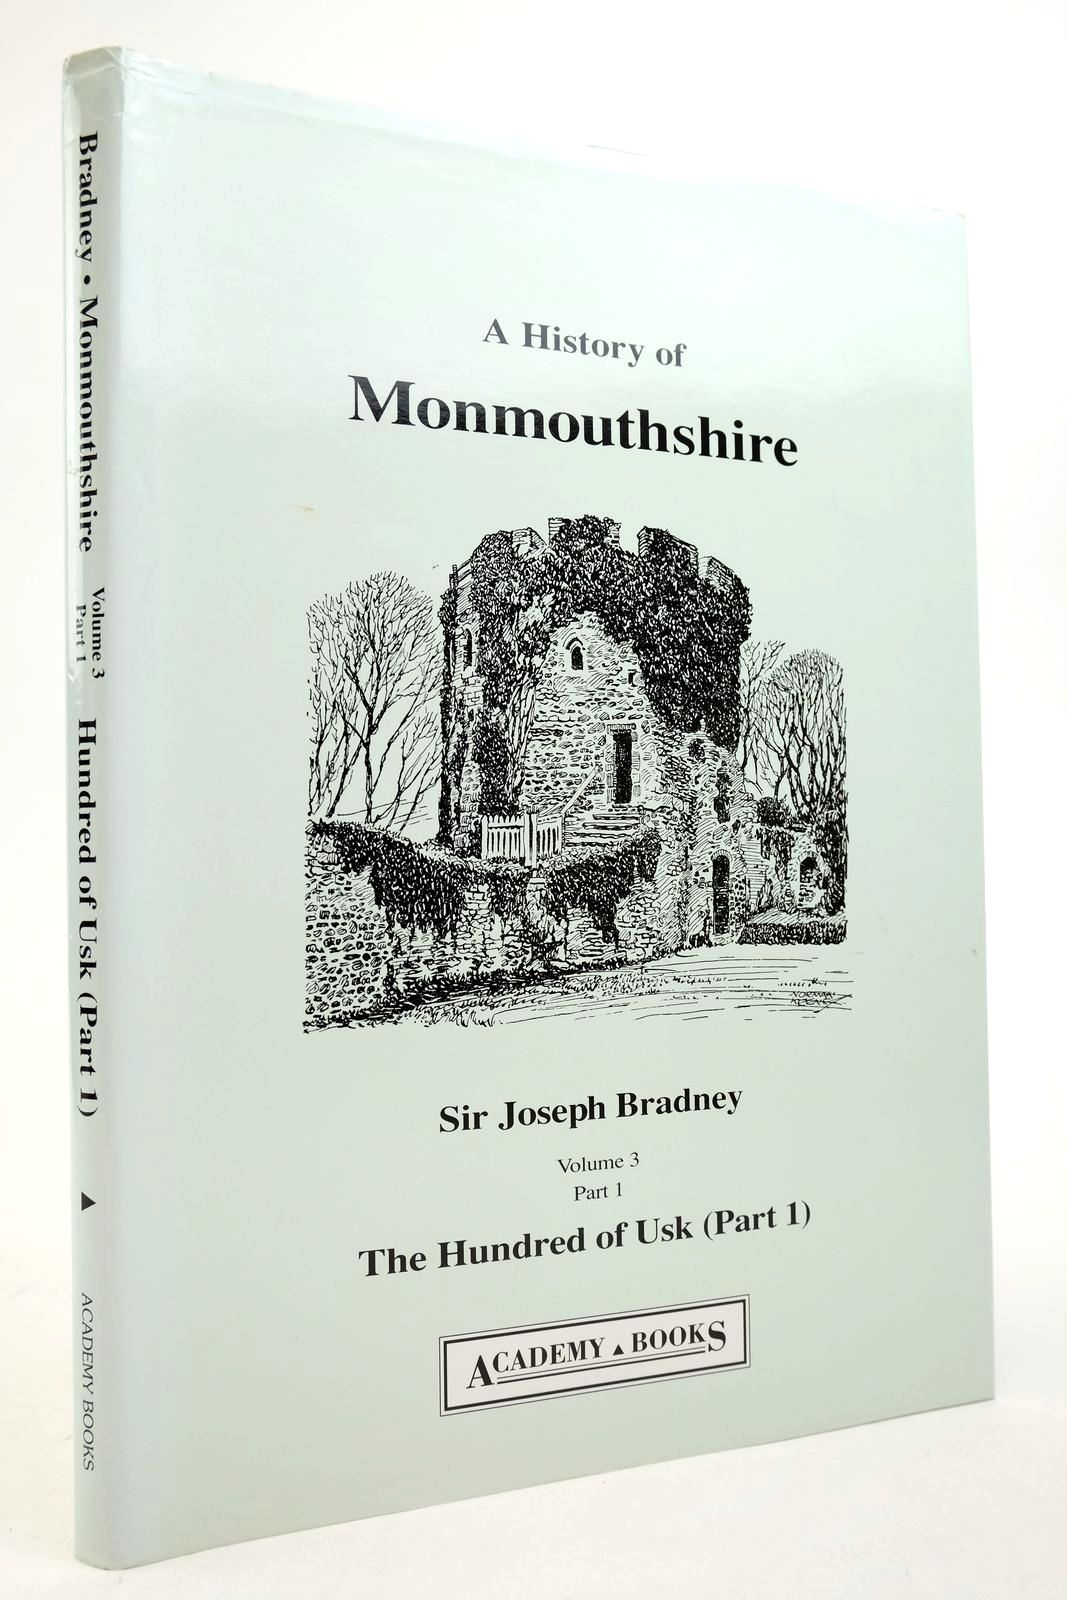 A History of Monmouthshire The Hundred of Usk (part 1)